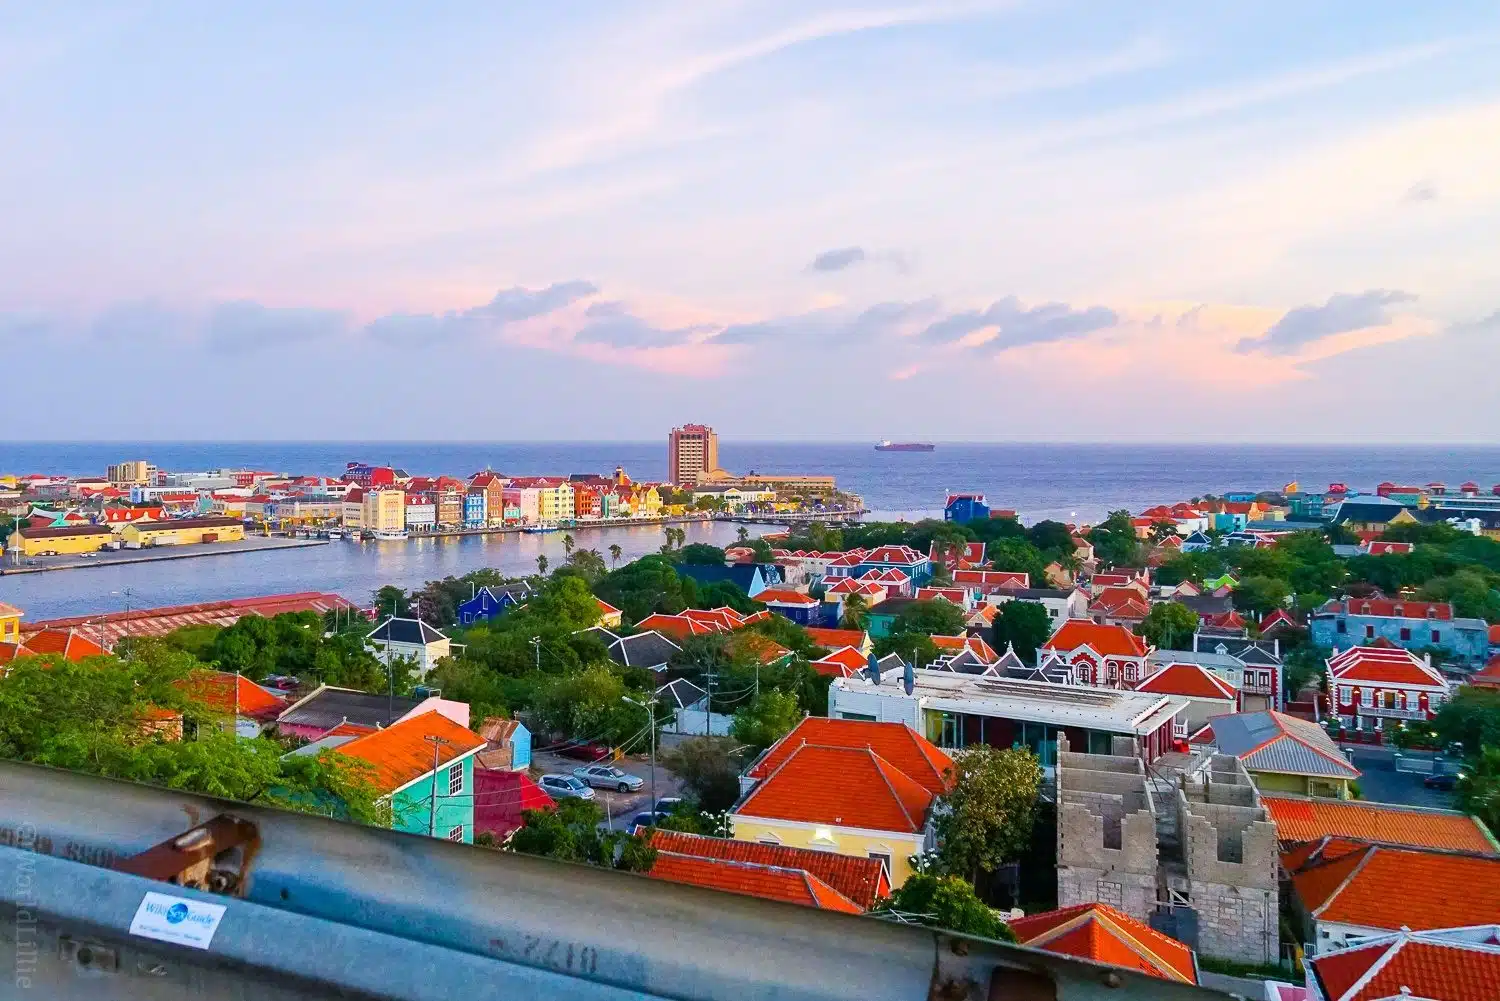 Looking down at Willemstad at sunset from the bridge.